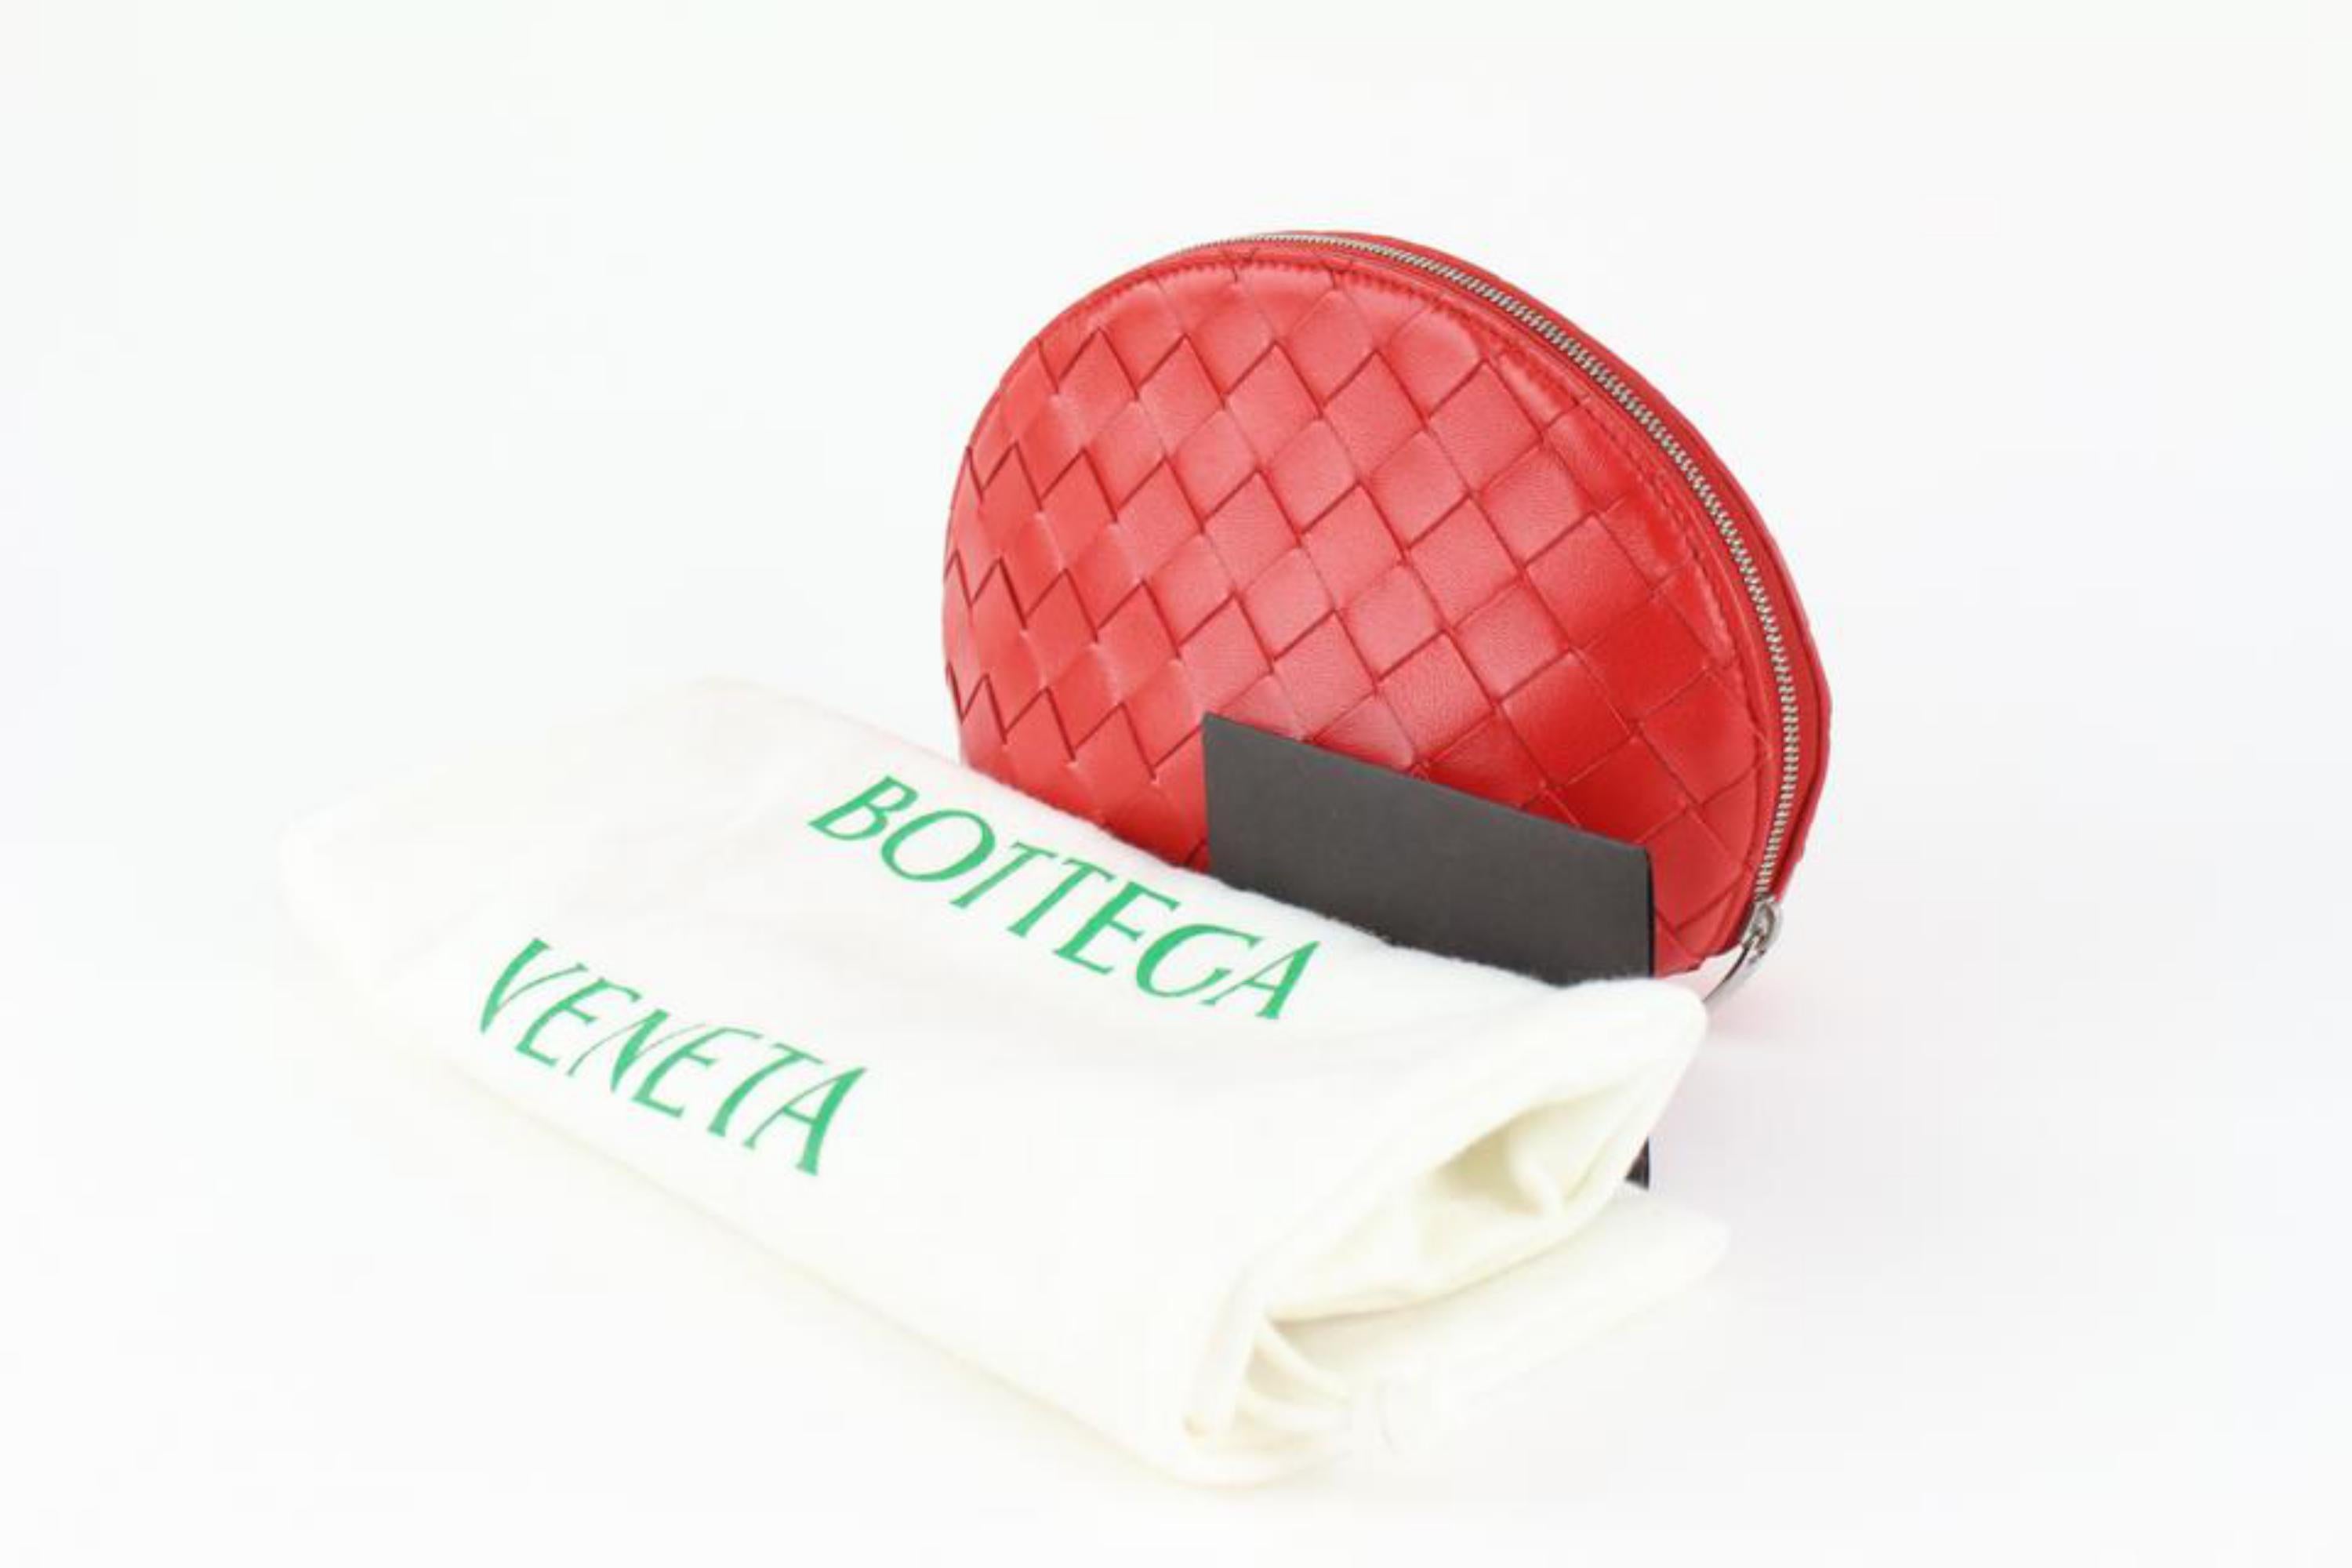 Bottega Veneta Red Intrecciato Leather Oval Cosmetic Pouch Toiletry Case 1123bv33
Date Code/Serial Number: B08642914P
Made In: Italy
Measurements: Length:  8